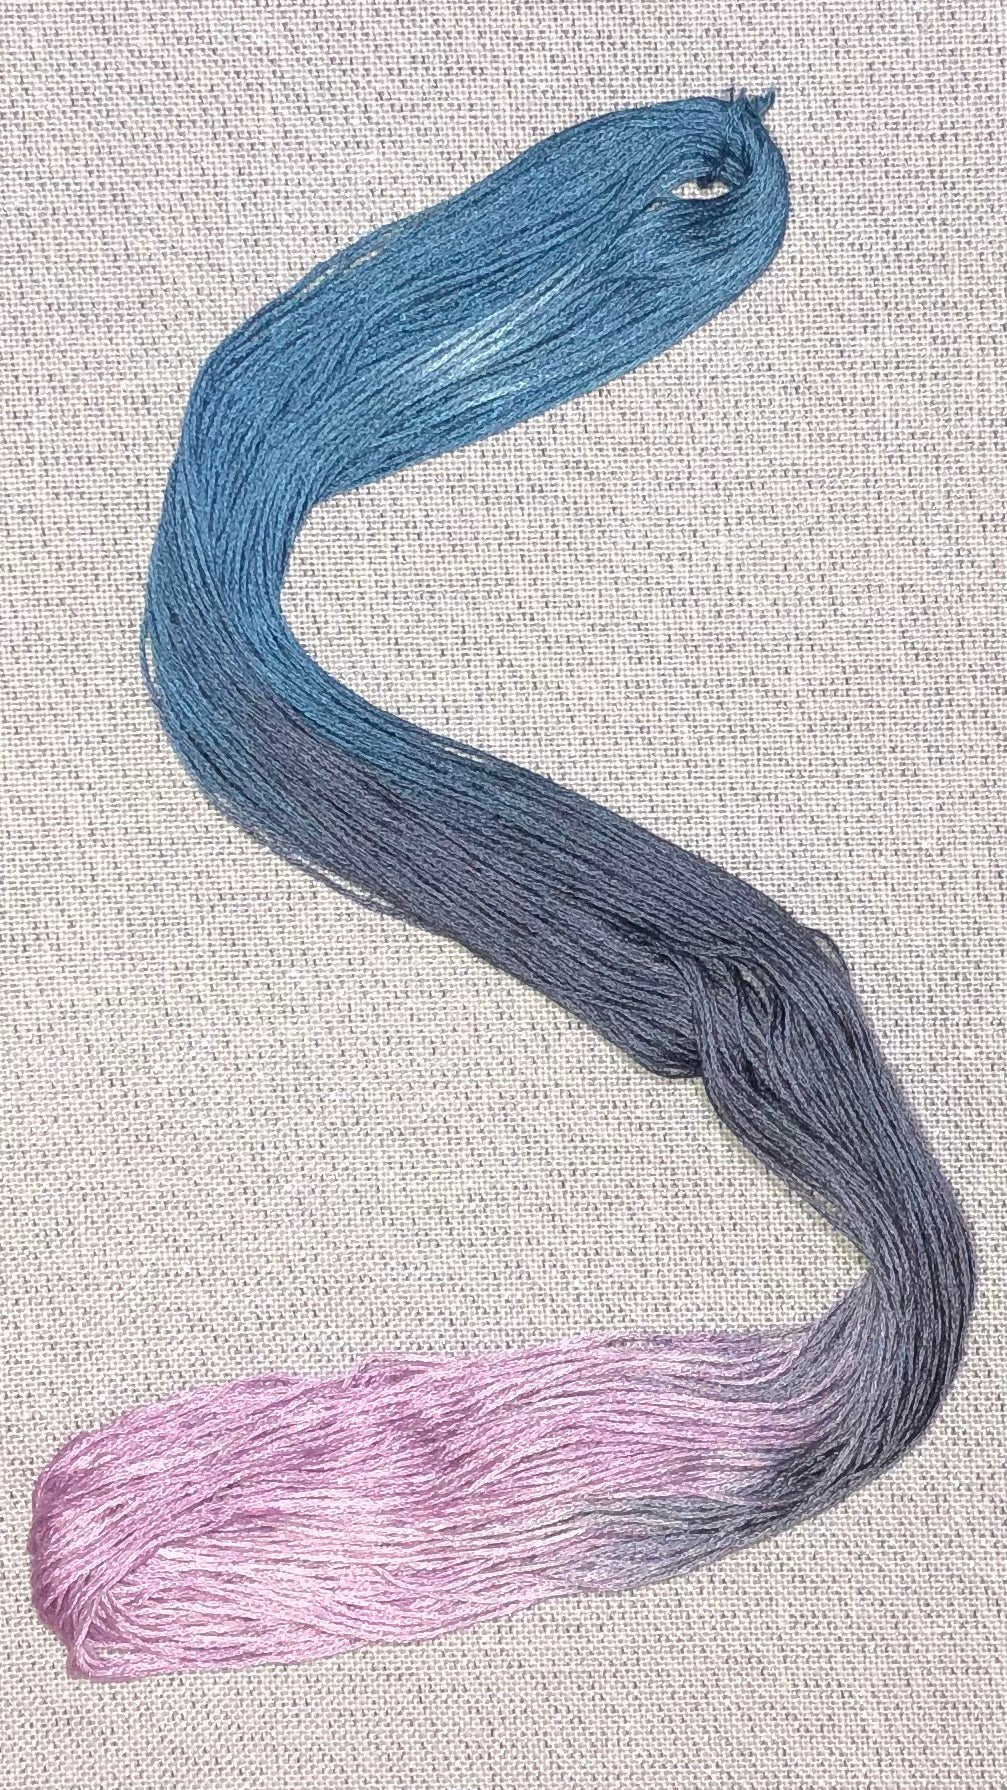 Silk hand dyed floss - So Long Shadow - Dyeing for Cross Stitch